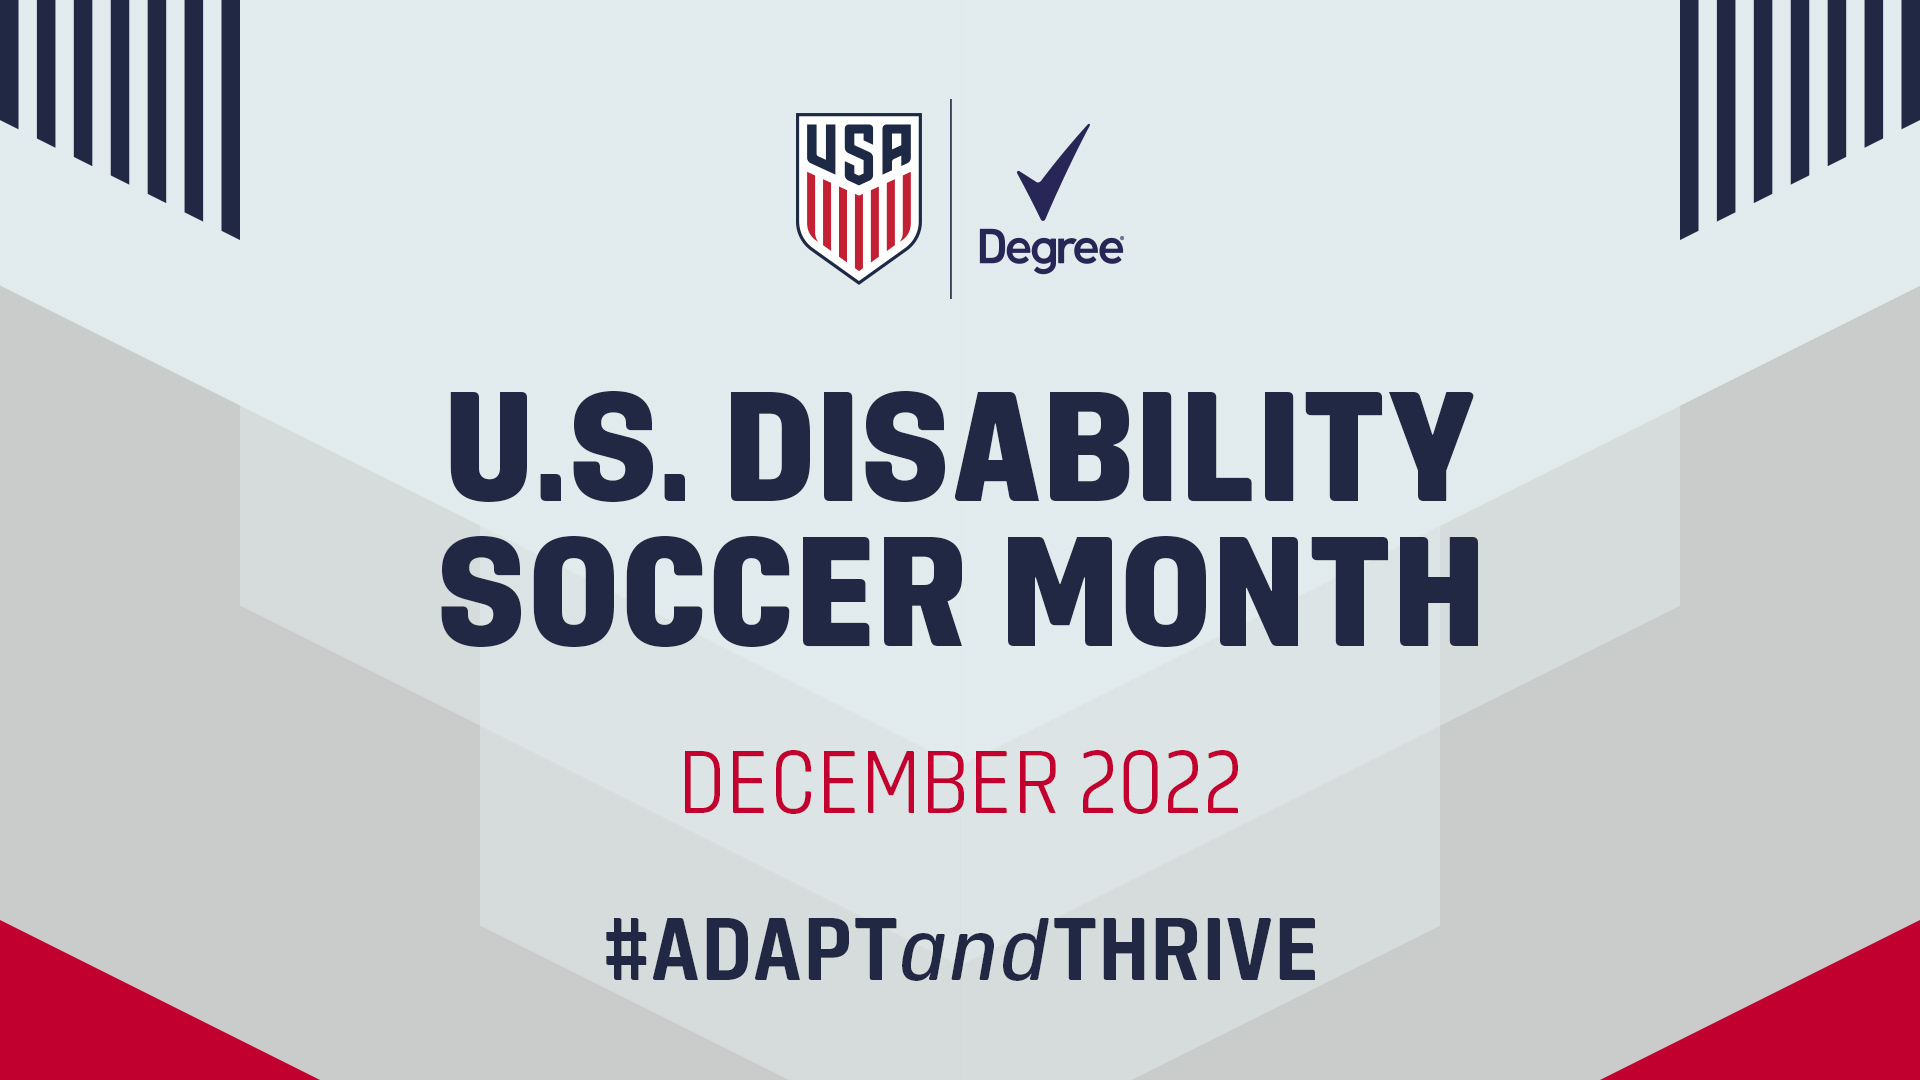  CHICAGO December 4 2022 December marks the third annual USA Disability Soccer Month presented by Degree Deodorant with US Soccer working closely with Degree to celebrate member organizations and programs that support to athletes with disabilities in all corners of the sport Degree became the first dedicated sponsor of the CP Men s and Women s National Teams in 2021 We are excited to bring back Disability Football Month this year with the help of Degree said Stuart Sharp Head Coach of Extended National Teams It is a major focus of attention in our disability soccer programs and member organizations from the National Team level to the grassroots and across all disciplines of the sport There are so many individuals and organizations doing great things in this space and it s inspiring to see our Adapt and Thrive message across the country Disabled Football Month will once again bring a series of exciting moments to highlight the community of American soccer organizations that serve athletes with disabilities including the American Amputee Soccer Association Down Syndrome Sports of America Association Midget Athletics of America American Association of Blind Athletes Cerebral Palsy Soccer USA Deaf Soccer and US Power Soccer Association The celebration began on December 3 the International Day of Persons with Disabilities and will continue throughout the month on US Soccer s social media platforms Two virtual events hosted by US Soccer s Disability Soccer Committee and the group of work ADAPTandTHRIVE The December 7 event focuses on professionals in and around disability soccer including coaches referees administrators and more Content will include accessible programming within soccer the importance of professional growth and development and other tools for success for disabled soccer professionals The December 11 event is a fun and interactive zoom training session for athletes US Soccer s Disability Service Organizations DSOs serve athletes of all ages and abilities and include opportunities for individuals who have limb differences intellectual and developmental disabilities or down syndrome cerebral palsy traumatic brain injury stroke or dwarfism They also offer services to athletes who are blind partially sighted deaf hard of hearing or who use wheelchairs At the start of the new year US Soccer will celebrate the CP Men s and Women s Players of the Year Award presented by Degree and the ADAPTandTHRIVE Award to honor individuals making an impact on disability soccer Award nominees will be announced on December 12 BIG 2023 ON THE HORIZON December serves as preparation for a very active 2023 calendar year in which four of US Soccer s national Para teams will compete in one of the top international competitions The CP Men s National Team is preparing for the Parapan American Games to be held in Santiago Chile in November 2023 while the Deaf Men s and Women s National Teams will participate in the Deaf Soccer World Championship starting in September in Kuala Lumpur Malaysia In addition the US Power Soccer mixed national team will host its first camp under the auspices of US Soccer in January following its preparation for the FIPFA Powerchair World Cup in Sydney Australia in October 2023 Below is a snapshot of some of the key Extended National Team programs planned in 2023 for US Soccer s Para NT The second annual ADAPTandTHRIVE Invitational is scheduled for early March in Chula Vista California with all five US Para NTs hosting camps March 1 9 CP MNT CP WNT Deaf MNT Deaf WNT Power Soccer NT Power Soccer will host its inaugural camp under US Soccer in January ahead of its World Cup in Australia in October Deaf WNT will have its first camp under US Soccer in January along with MNT as both teams prepare for the World Deaf Soccer Championship in Malaysia in September CP WNT will begin preparation for a yet to be finalized international competition at the ADAPTandTHRIVE Invitational while CP MNT will have a full camp slate in preparation for the Parapan American Games in Santiago Chile in November Both Cerebral Palsy National Teams are for qualified players with cerebral palsy stroke or traumatic brain injury Source link  